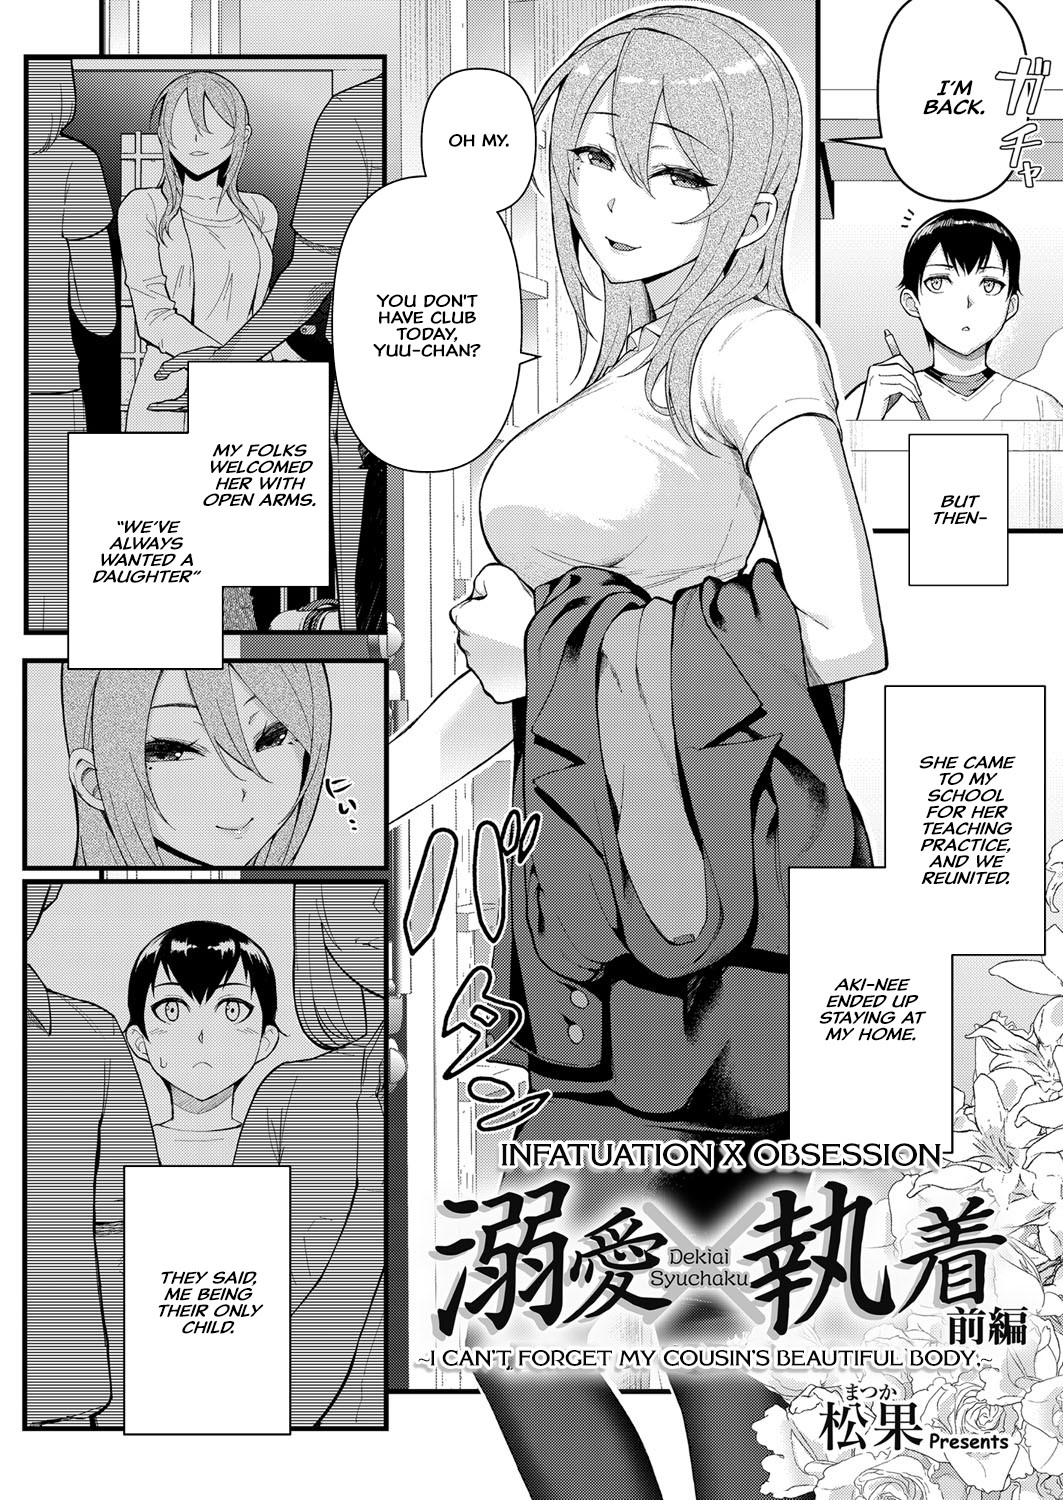 Hentai Manga Comic-Infatuation x Obsession Part 1 ~I Can't Forget My Cousin's Beautiful Body~-Read-2